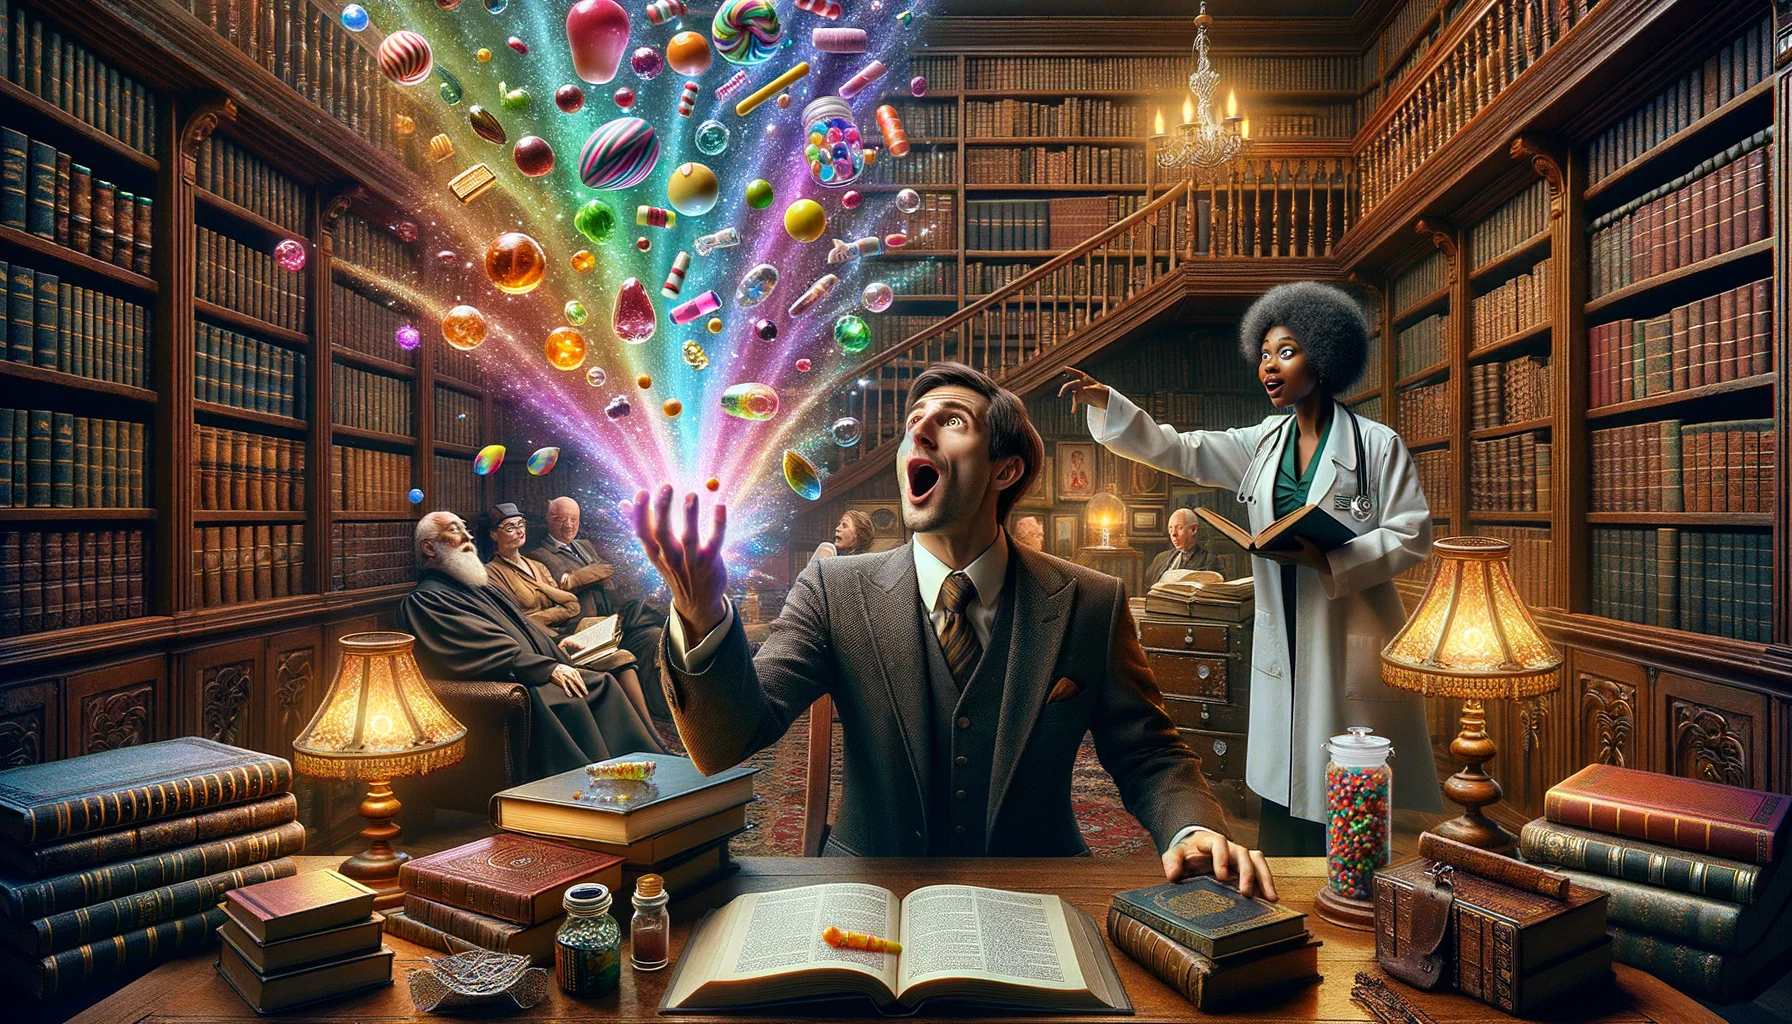 Imagine a humorously exaggerated, highly detailed scene centered around the concept of a 'Candy for Enhancing Focus and Concentration'. Picture an elaborate study room filled with a multitude of scholarly books, antique wooden furniture, vintage accents, and globally sourced ornaments. In the midst of this, see a Caucasian man in a sophisticated suit, engrossed in multiple books opened around him, while his hand reaches out to a sparkling, rainbow hued, magical candy placed in an ethereal container. Beside him, also reaching out for a candy is a Black woman in a doctors coat, deeply engrossed with various medical journals. Plot twists with eyes wide open in surprise as the candy seems to emit a glow signifying potential benefits.